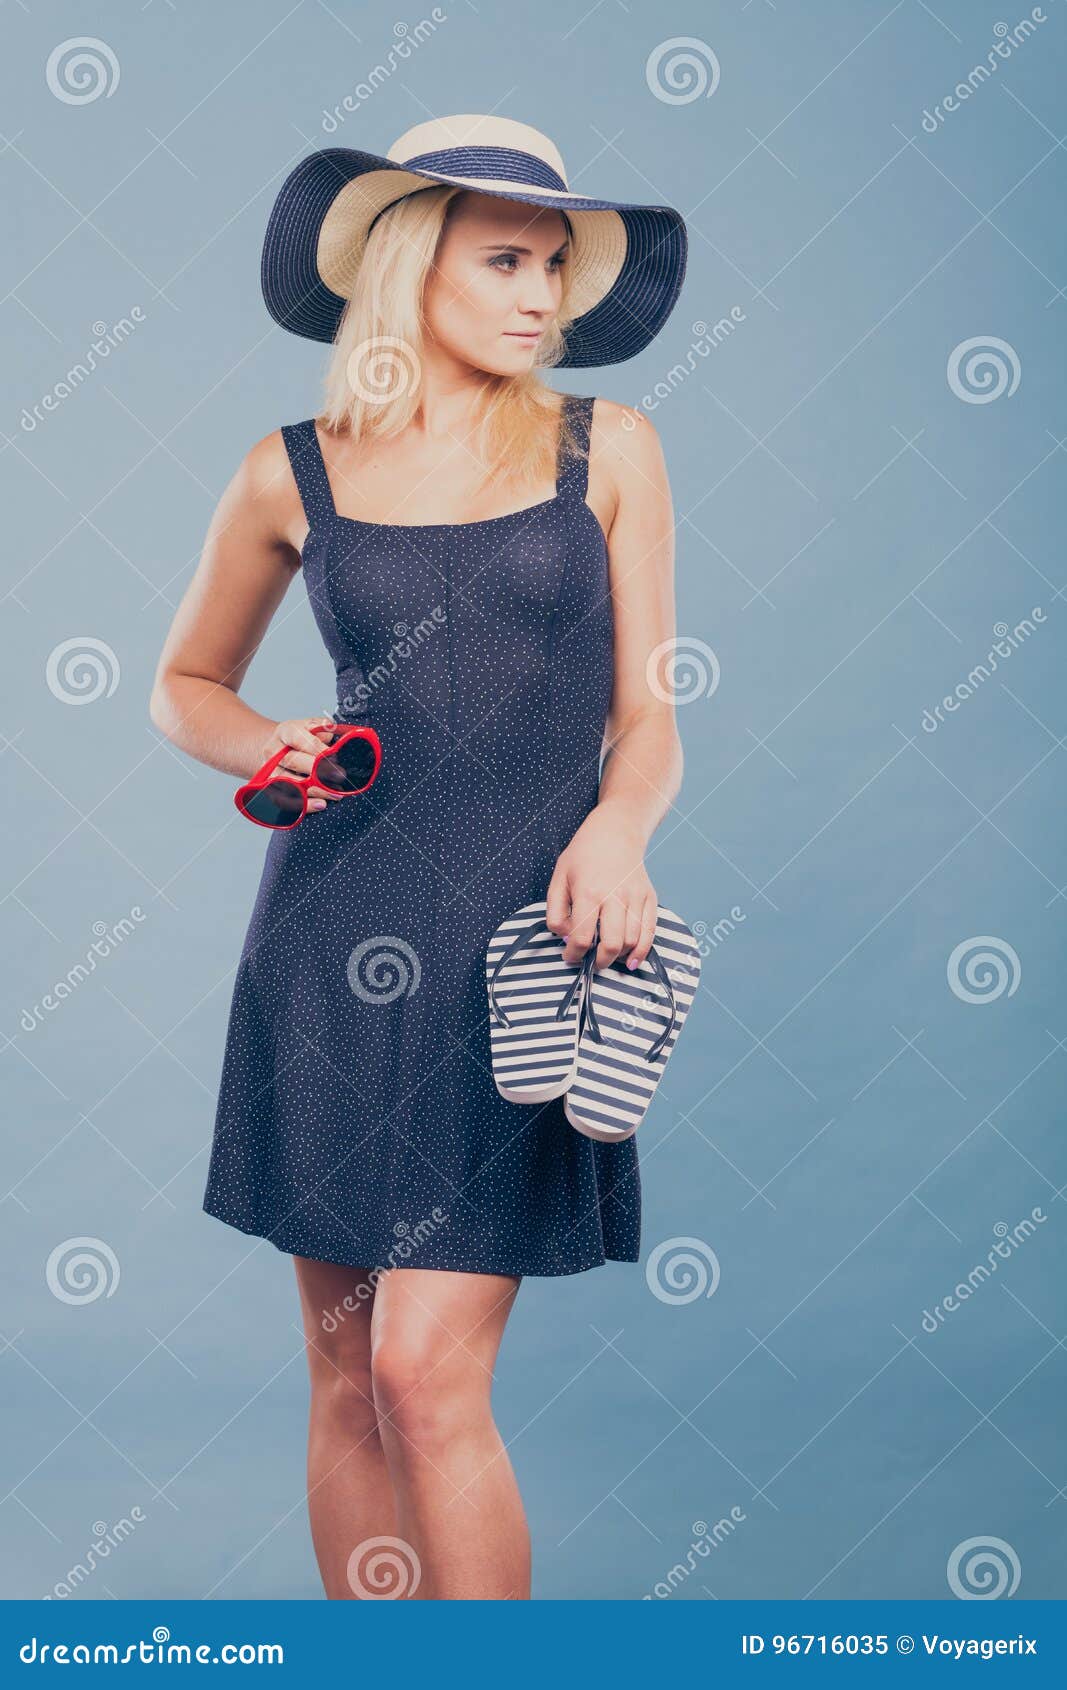 Woman Wearing Short Dress Holding Flip Flops and Sunglasses Stock Image ...